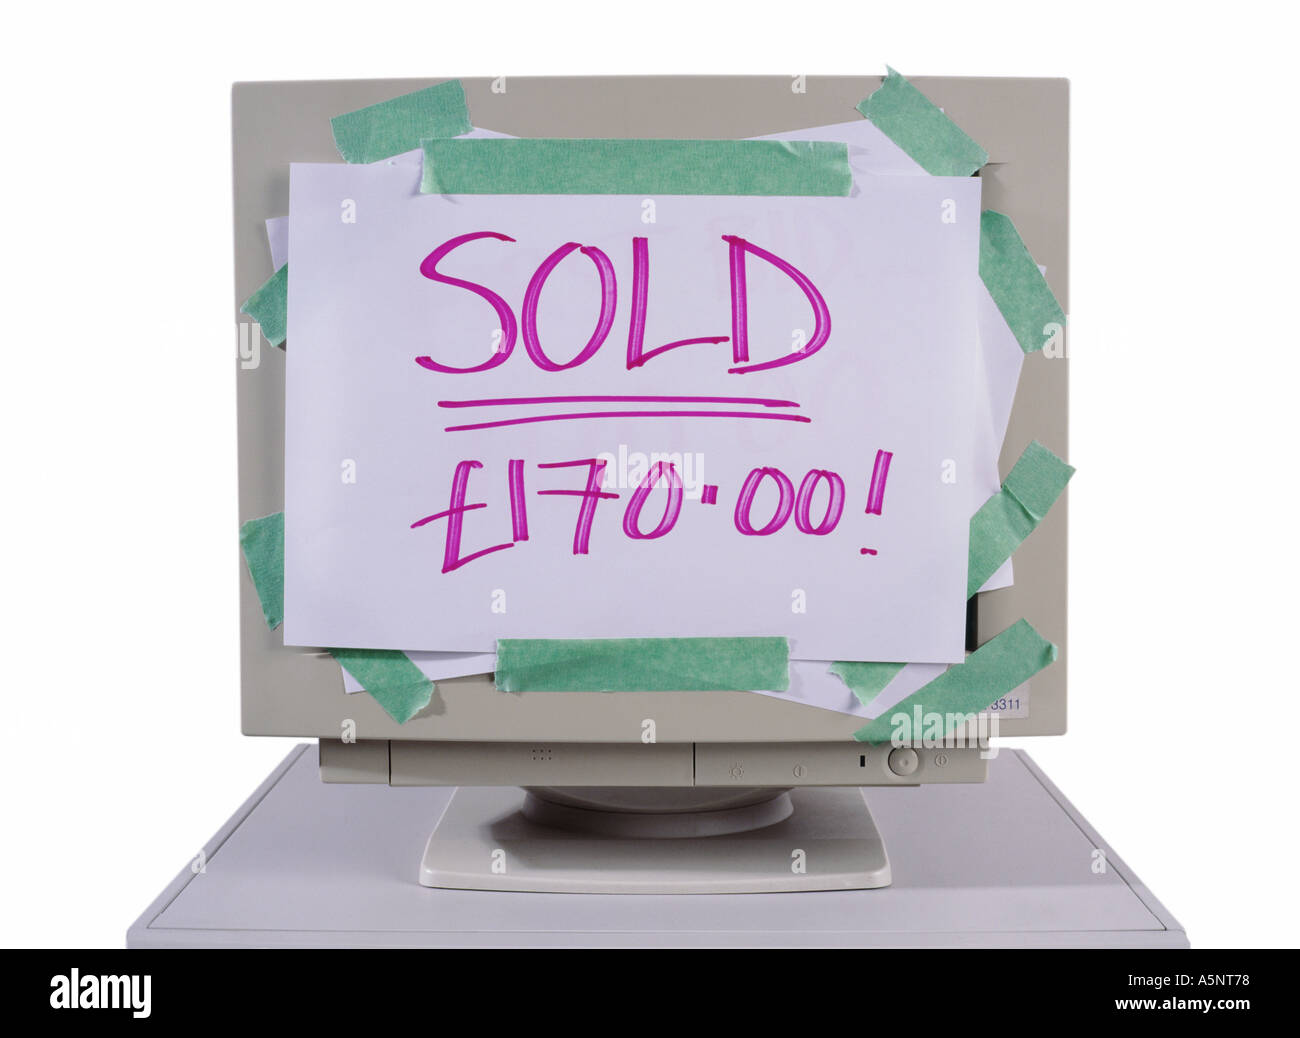 An old computer sold sign Stock Photo